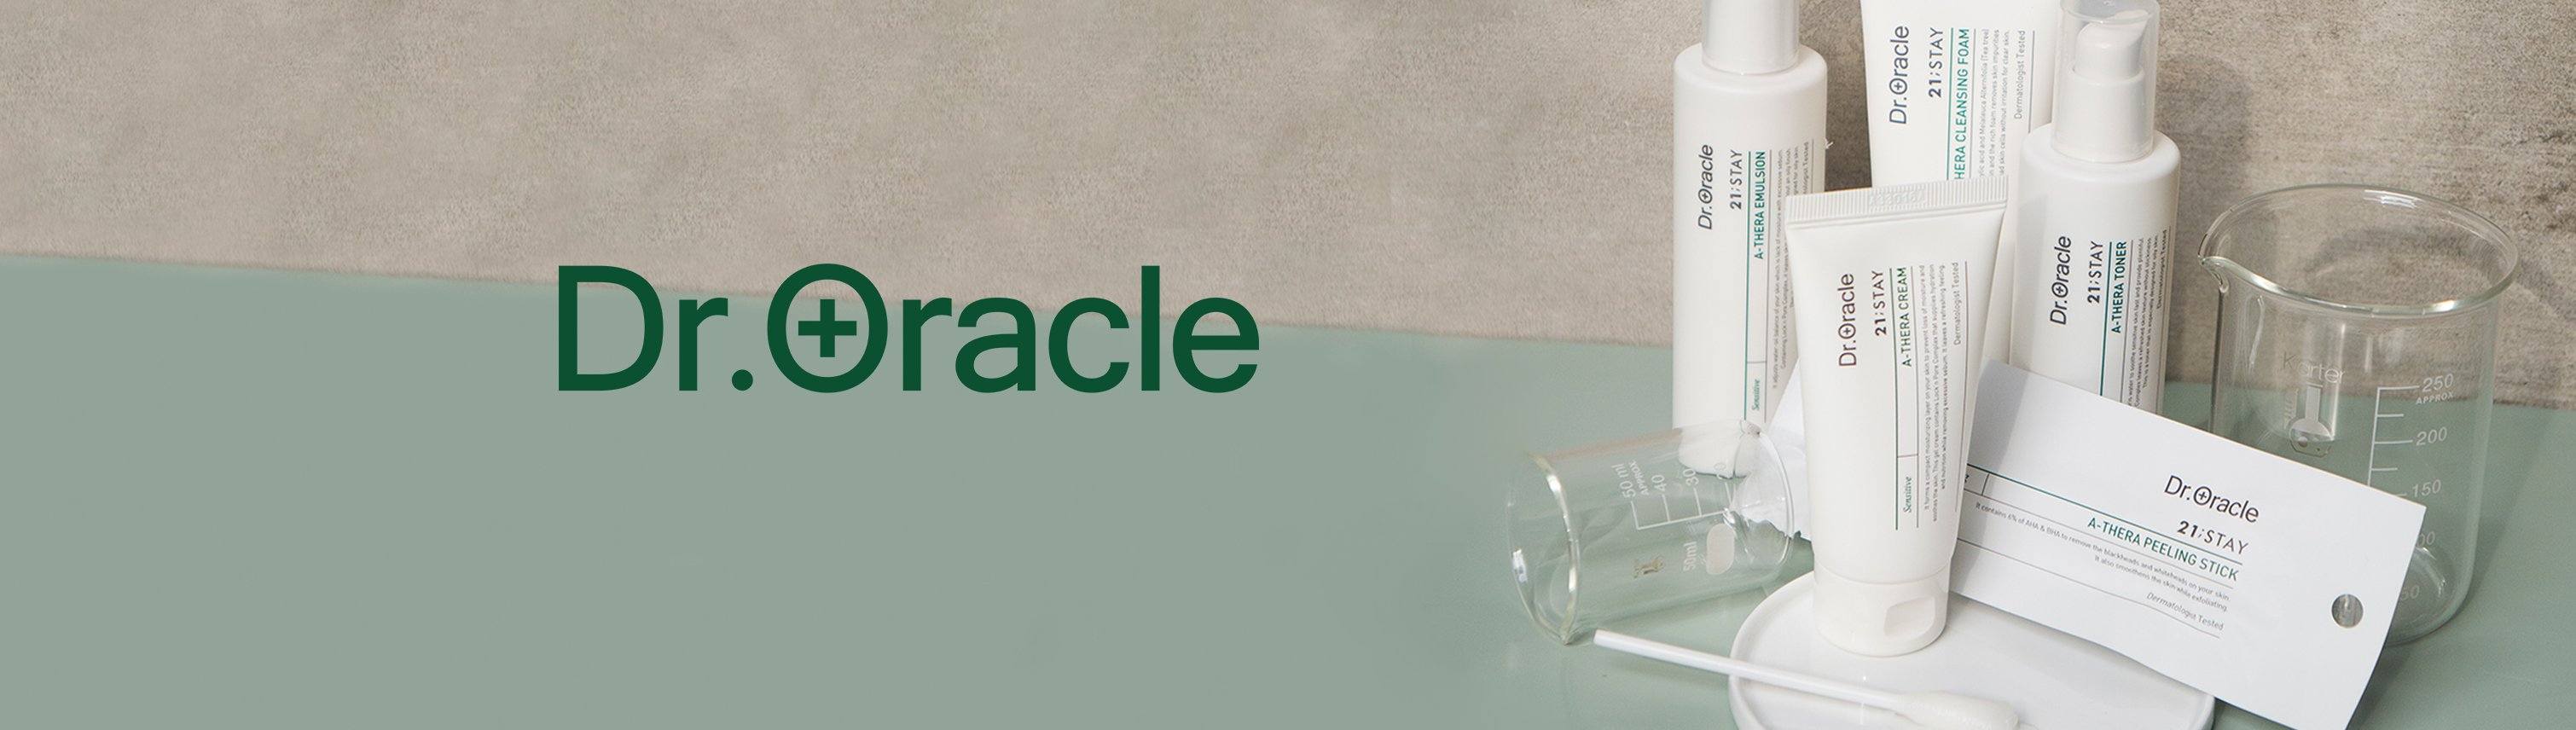 Dr Oracle